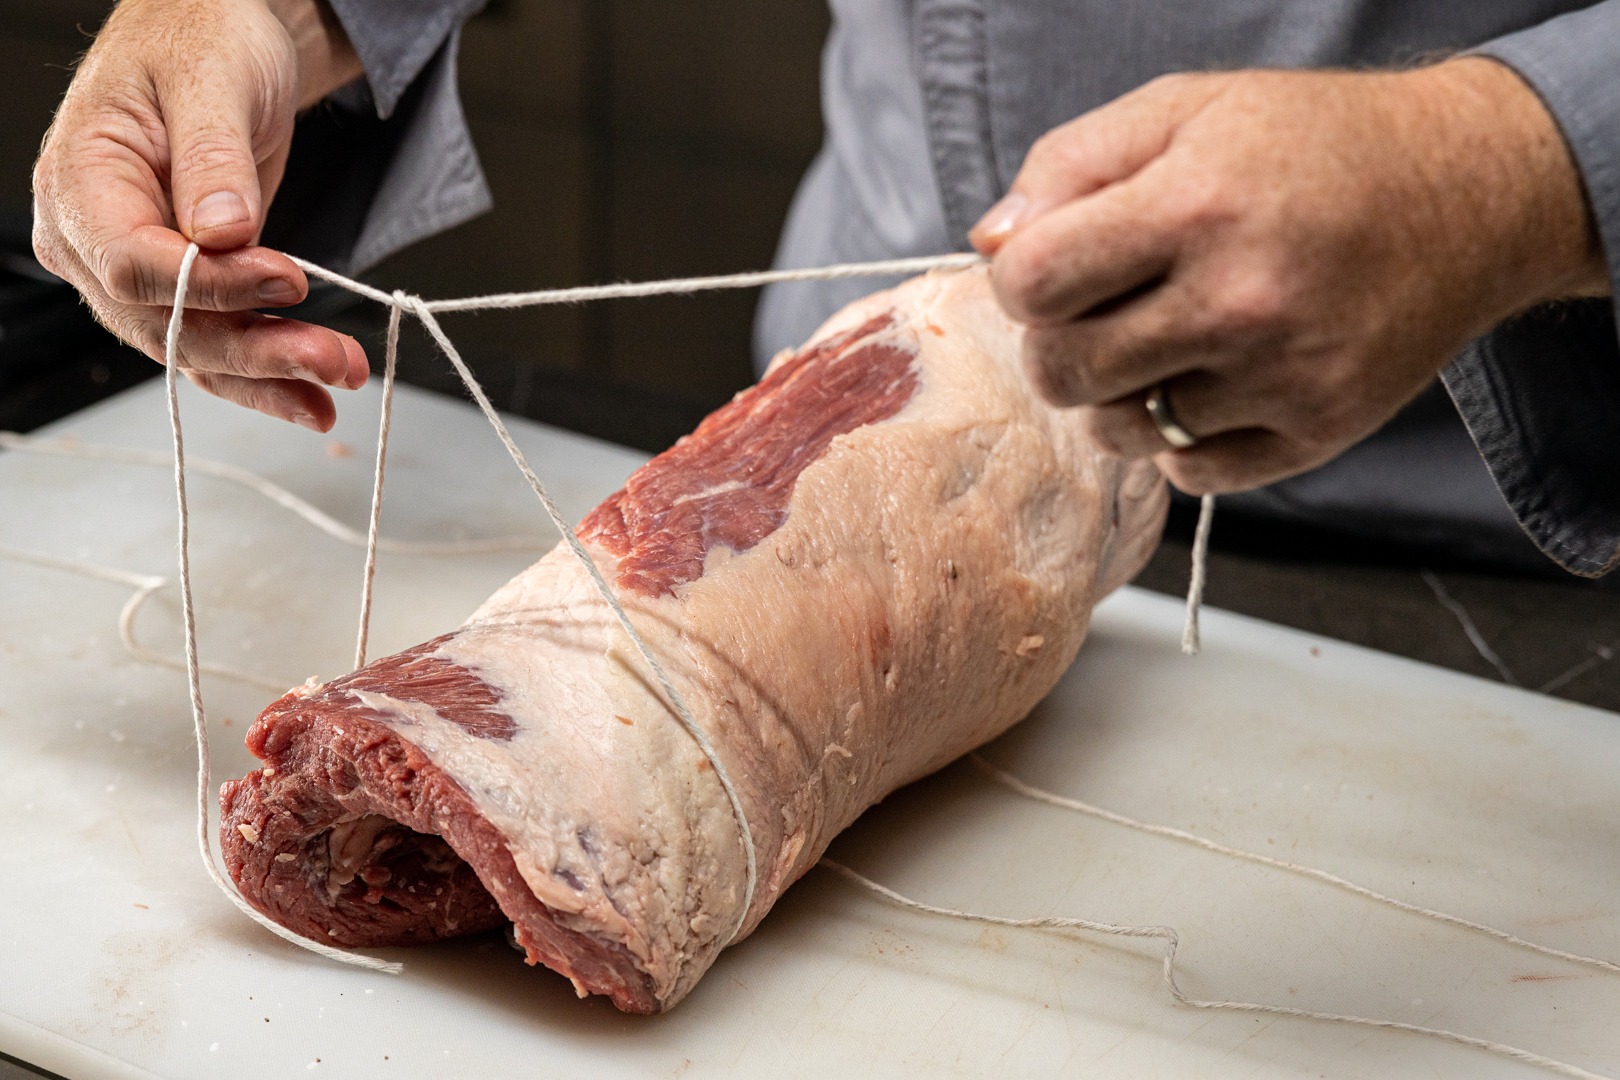 tying the brisket joint